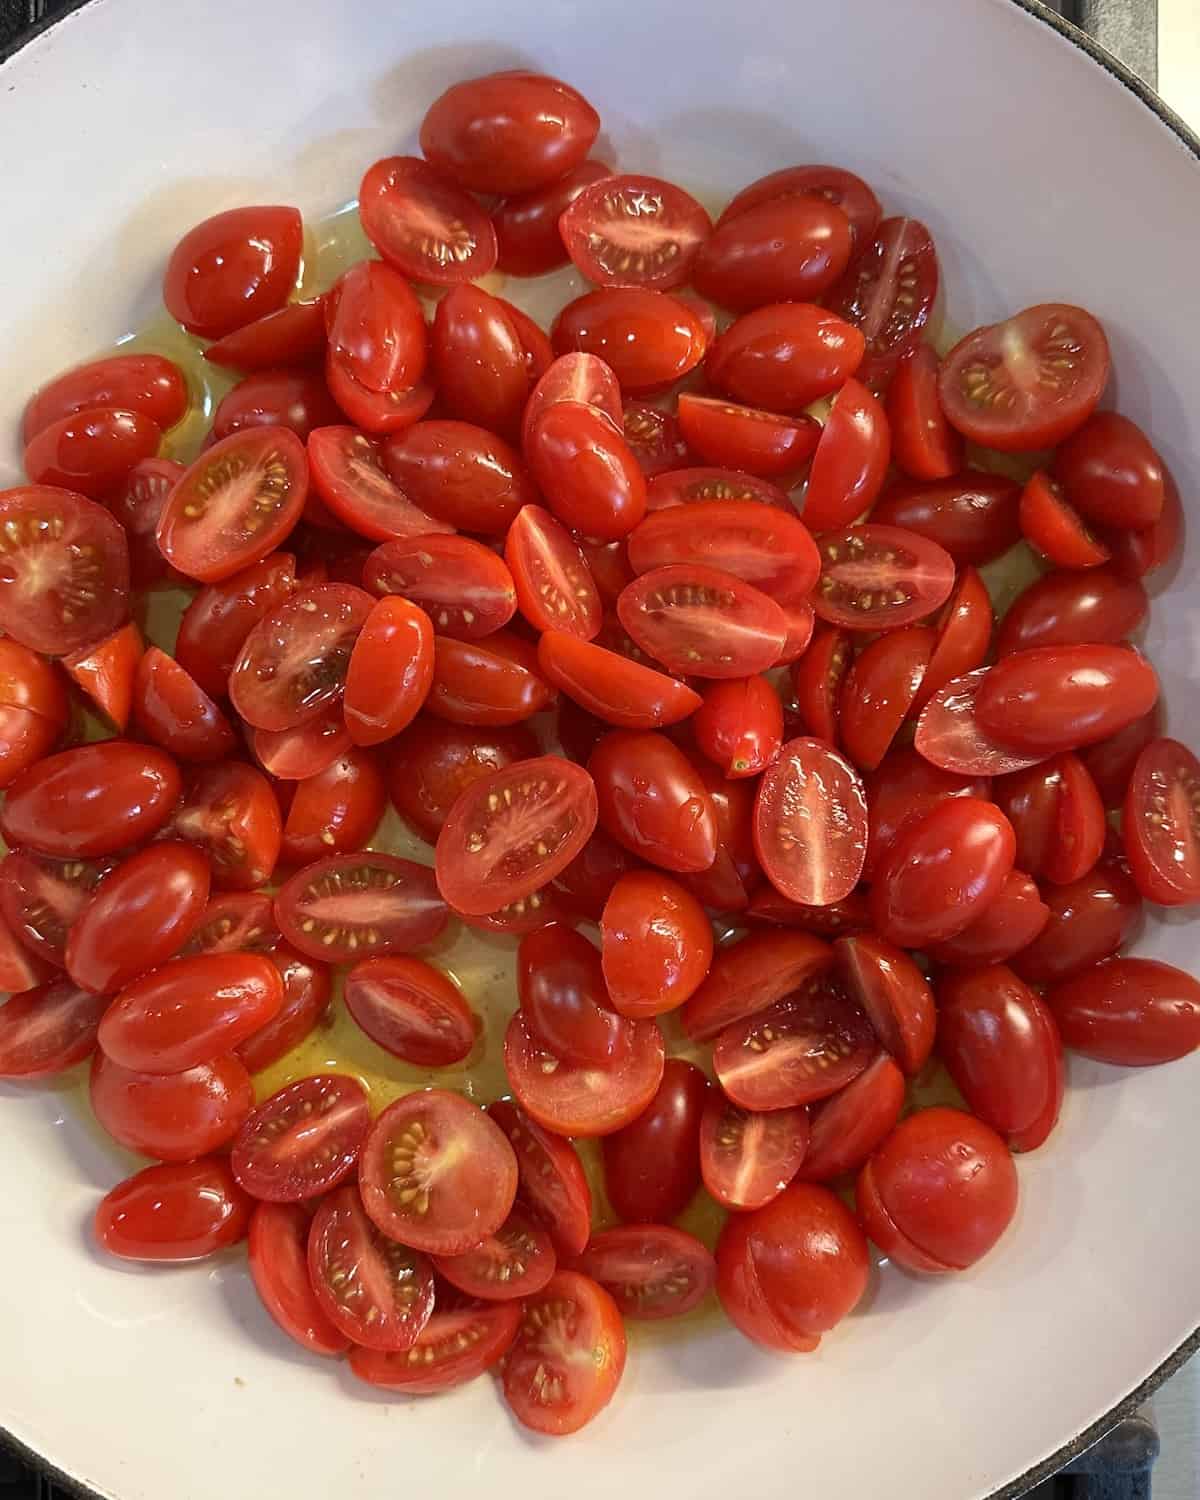 Halved cherry tomatoes in a medium skillet with olive oil over medium high heat.